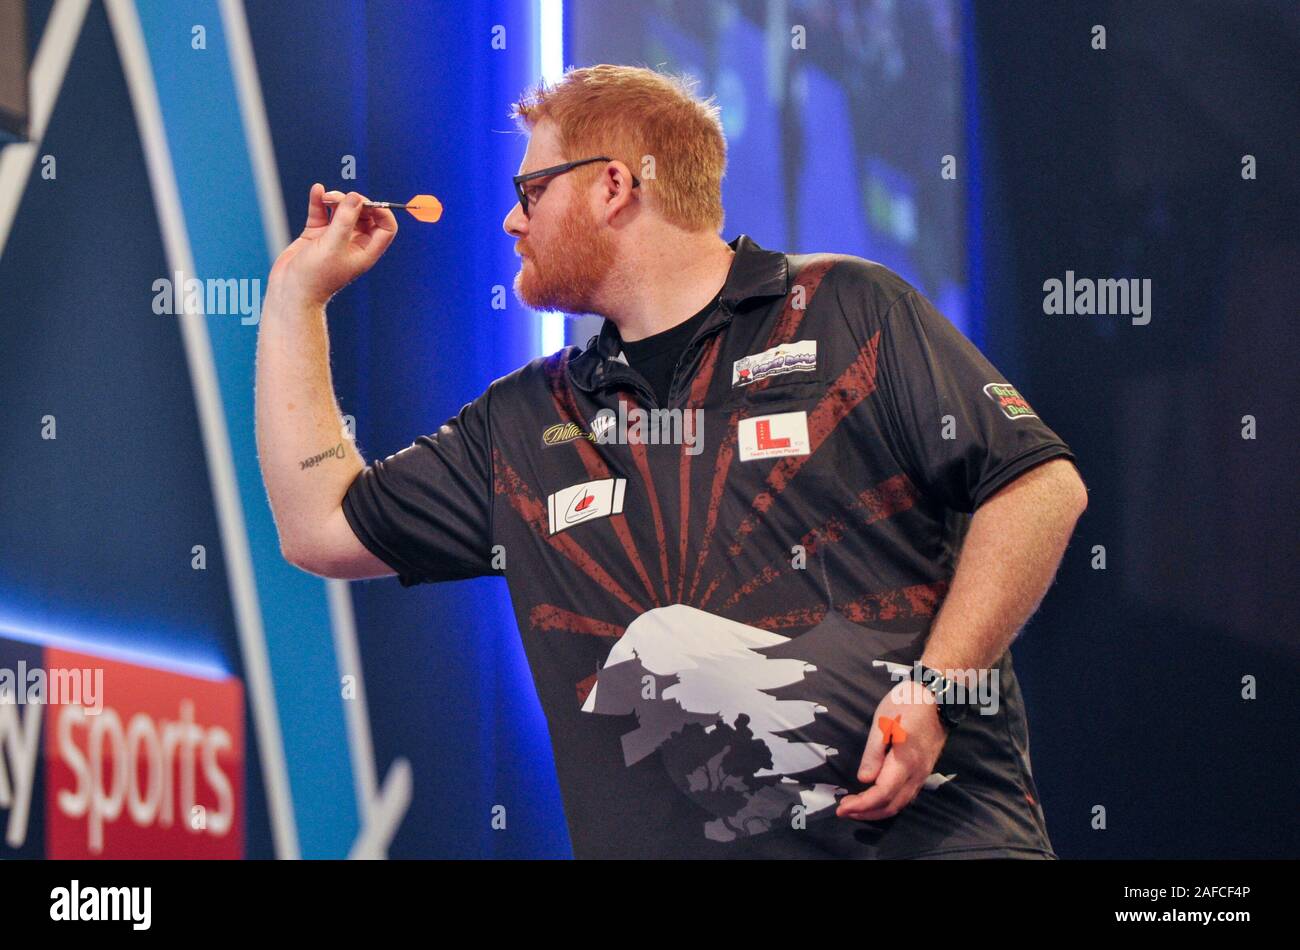 14 december 2019 London, Great Britain William Hill World Darts  Championship Matt Campbell during day 2 of the William Hill World Darts  Championship of darts at Alexandra Palace (Ally Pally) in Londen